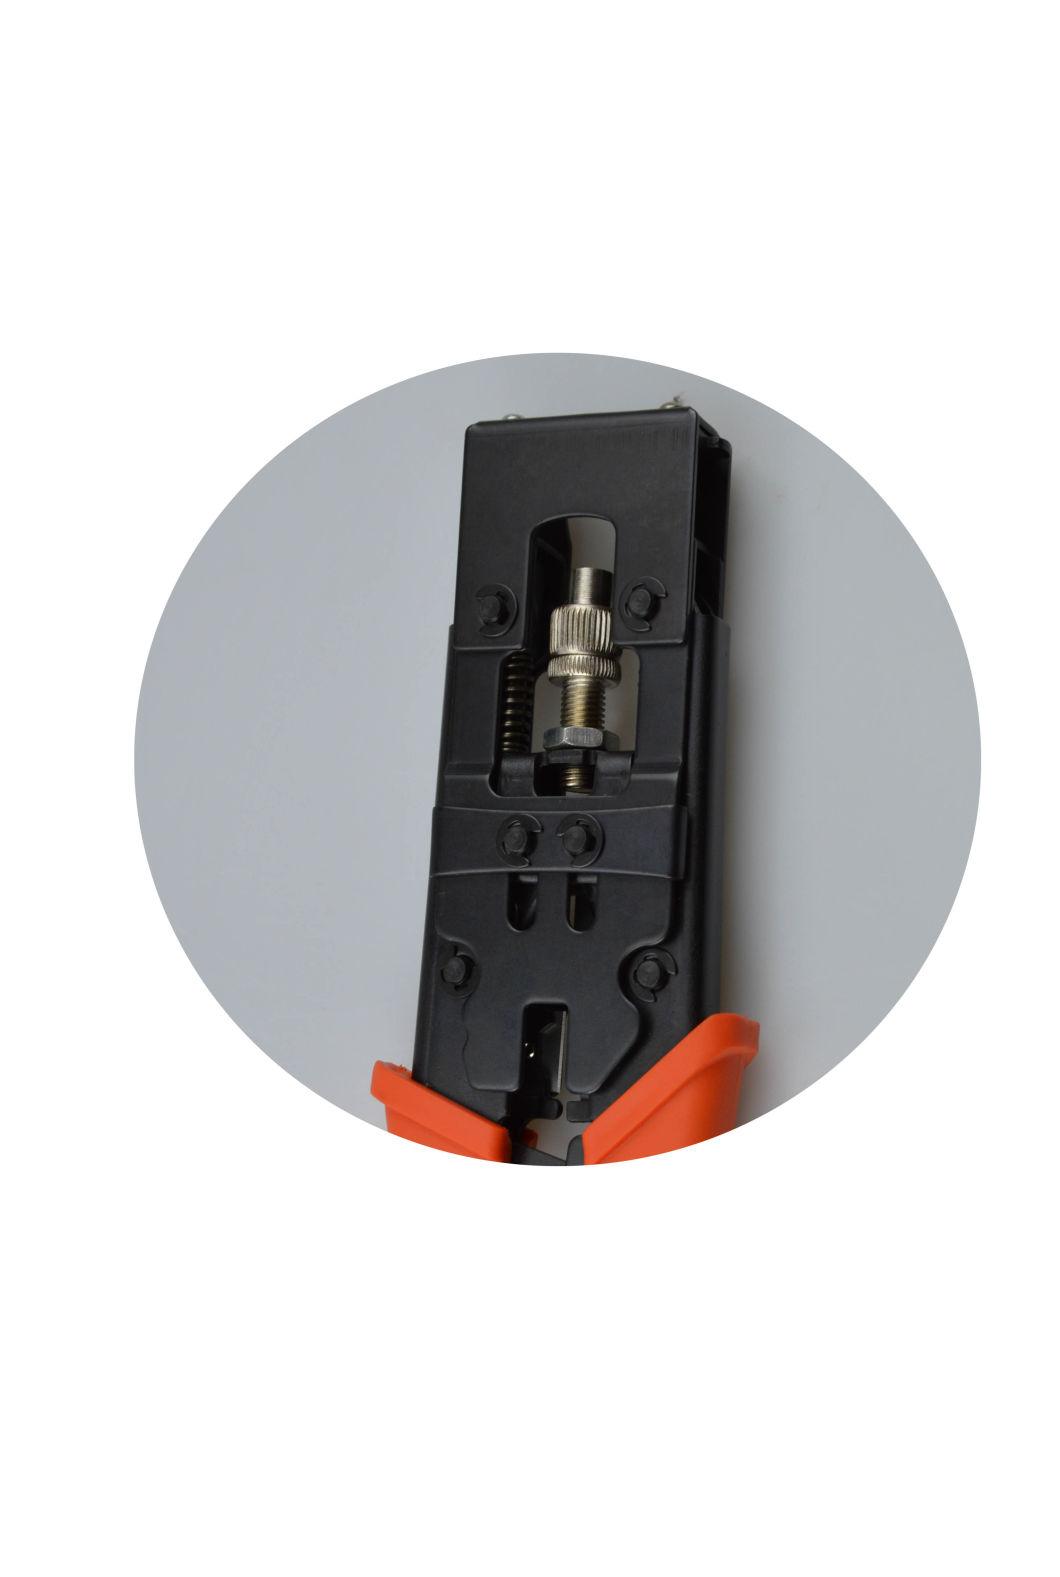 Tool for RJ45 and Cable Stripper RJ45 Rj12 Rj11 Network Cable Crimper Cutting